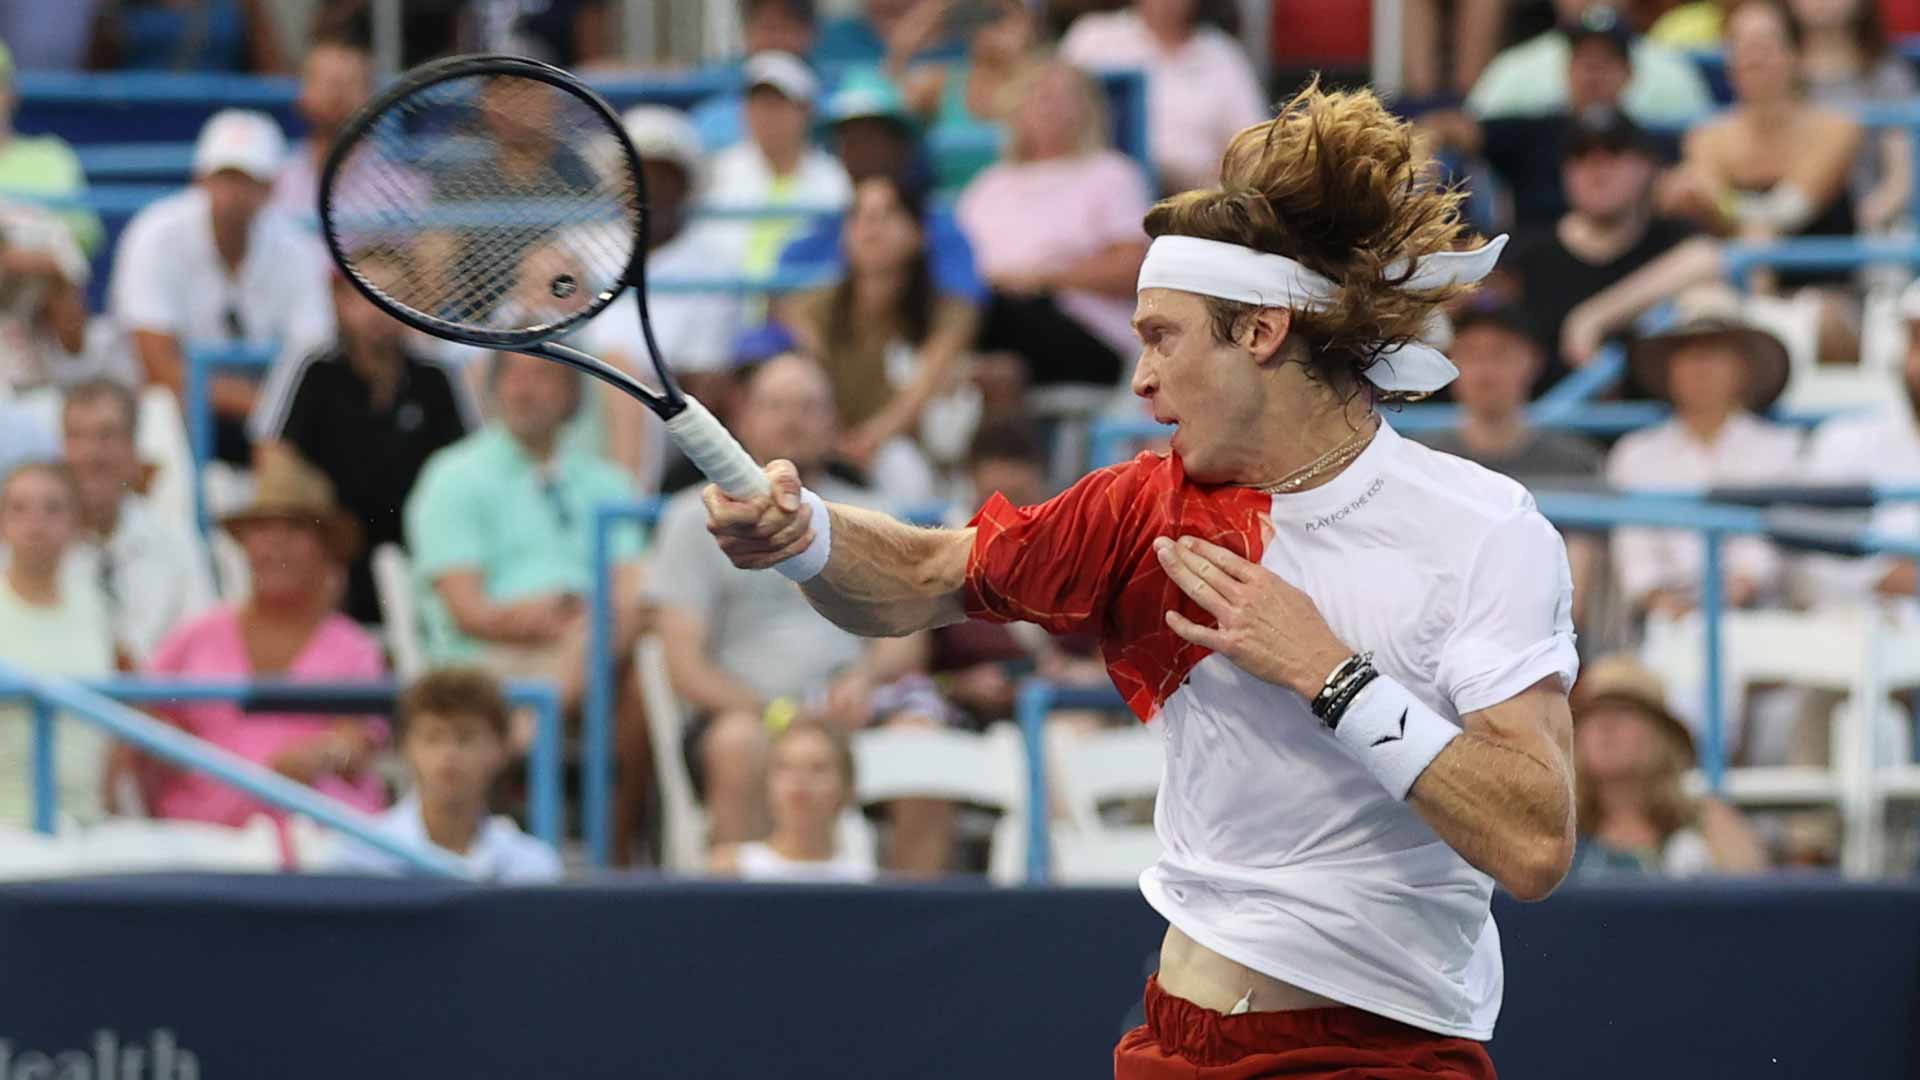 Rublev's game of aces assists rain-delay turnaround in Washington